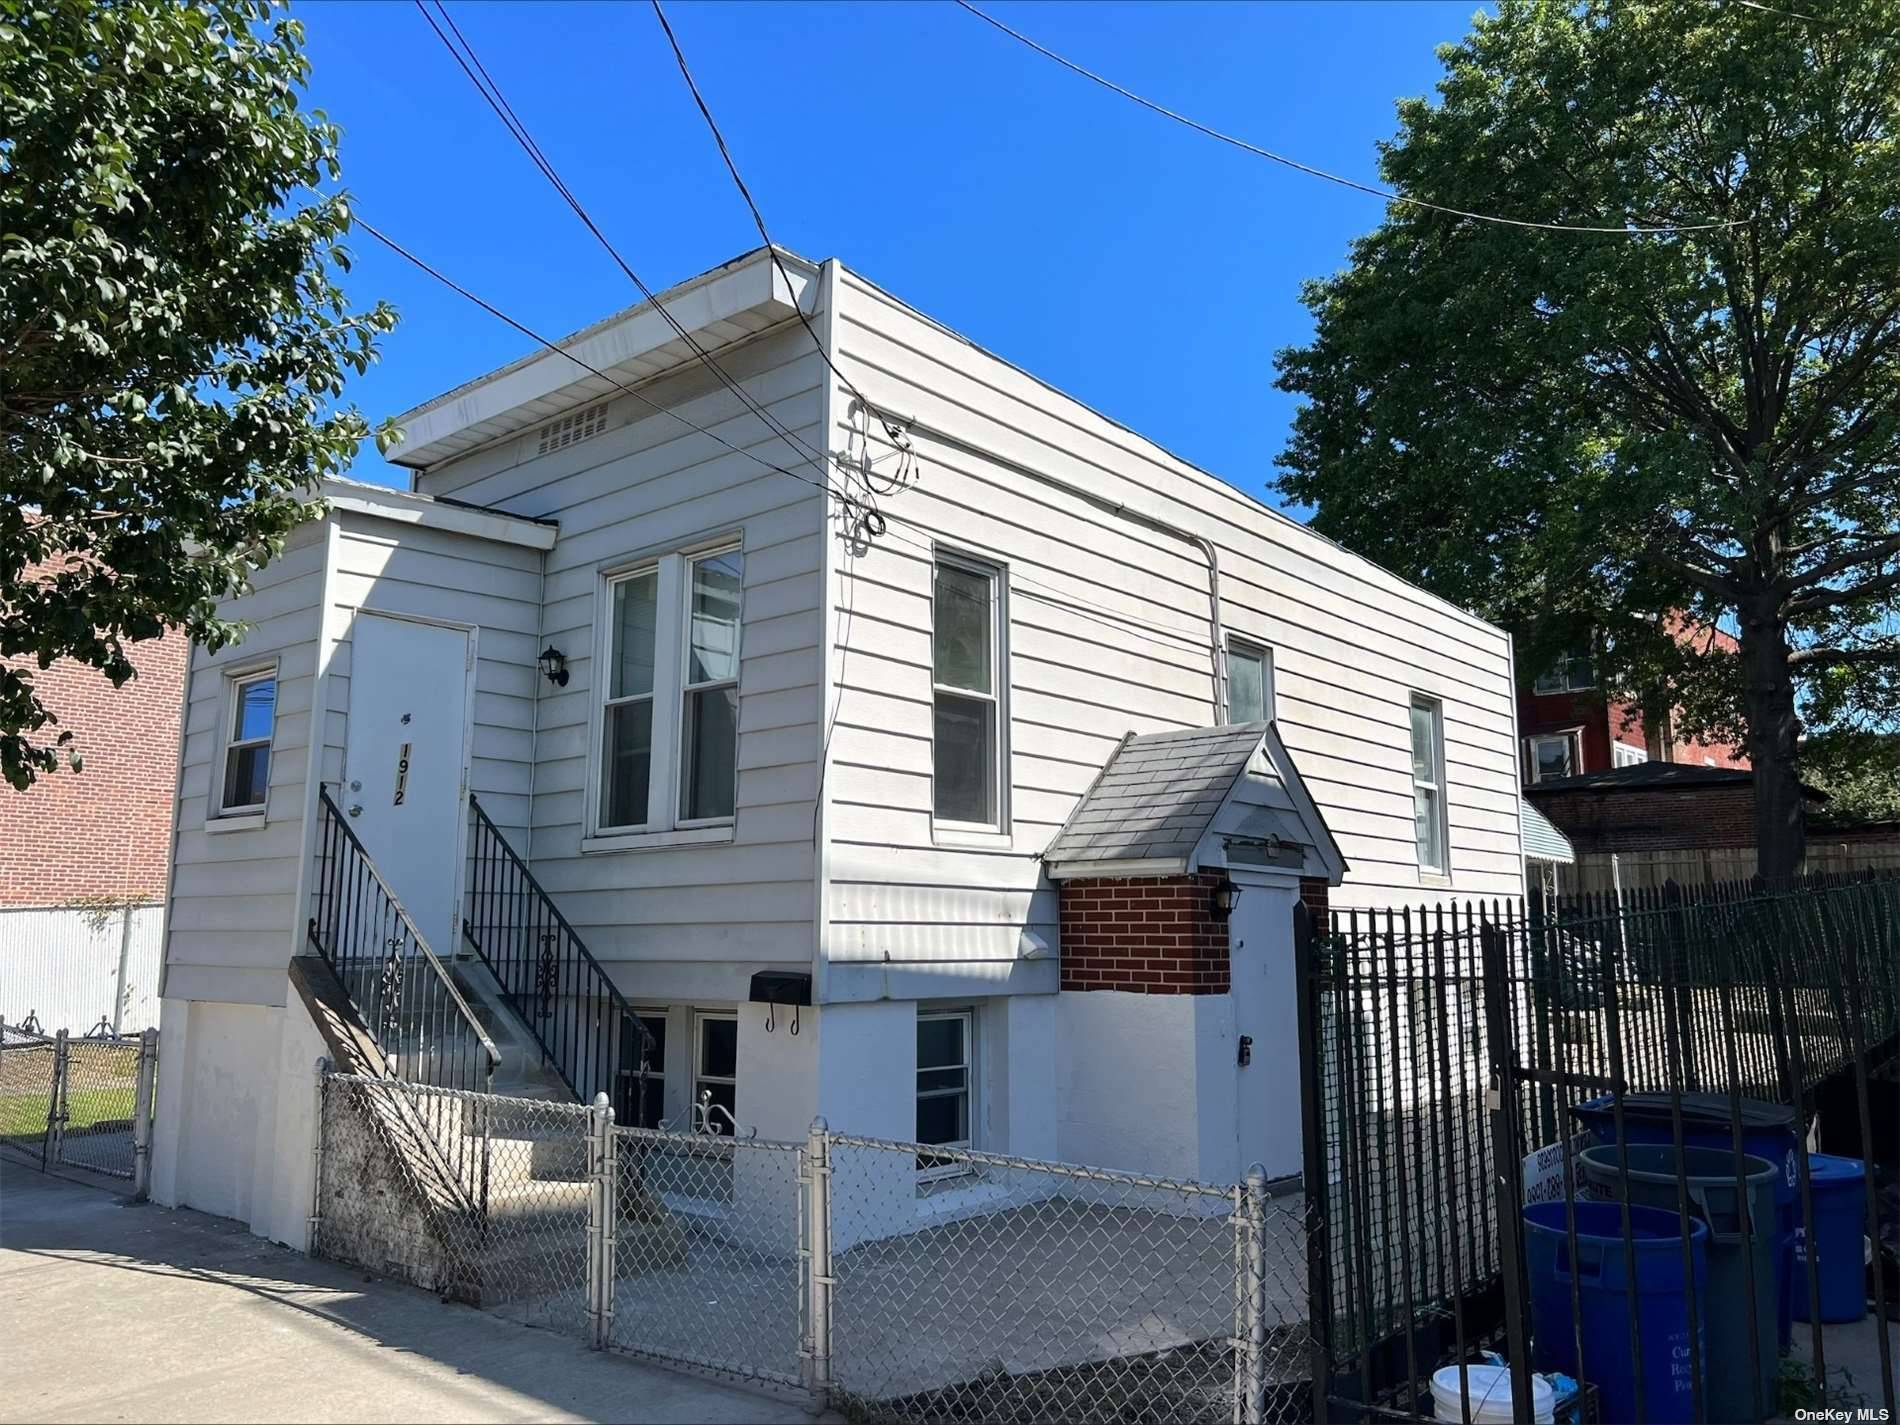 Completely Renovated Cozy Whole House for Rent in the Pelham Bay Area of the Bronx ; Features 2 Bedrooms, 1 New Bathroom, a Large Living Room, Eat in Kitchen, and ...